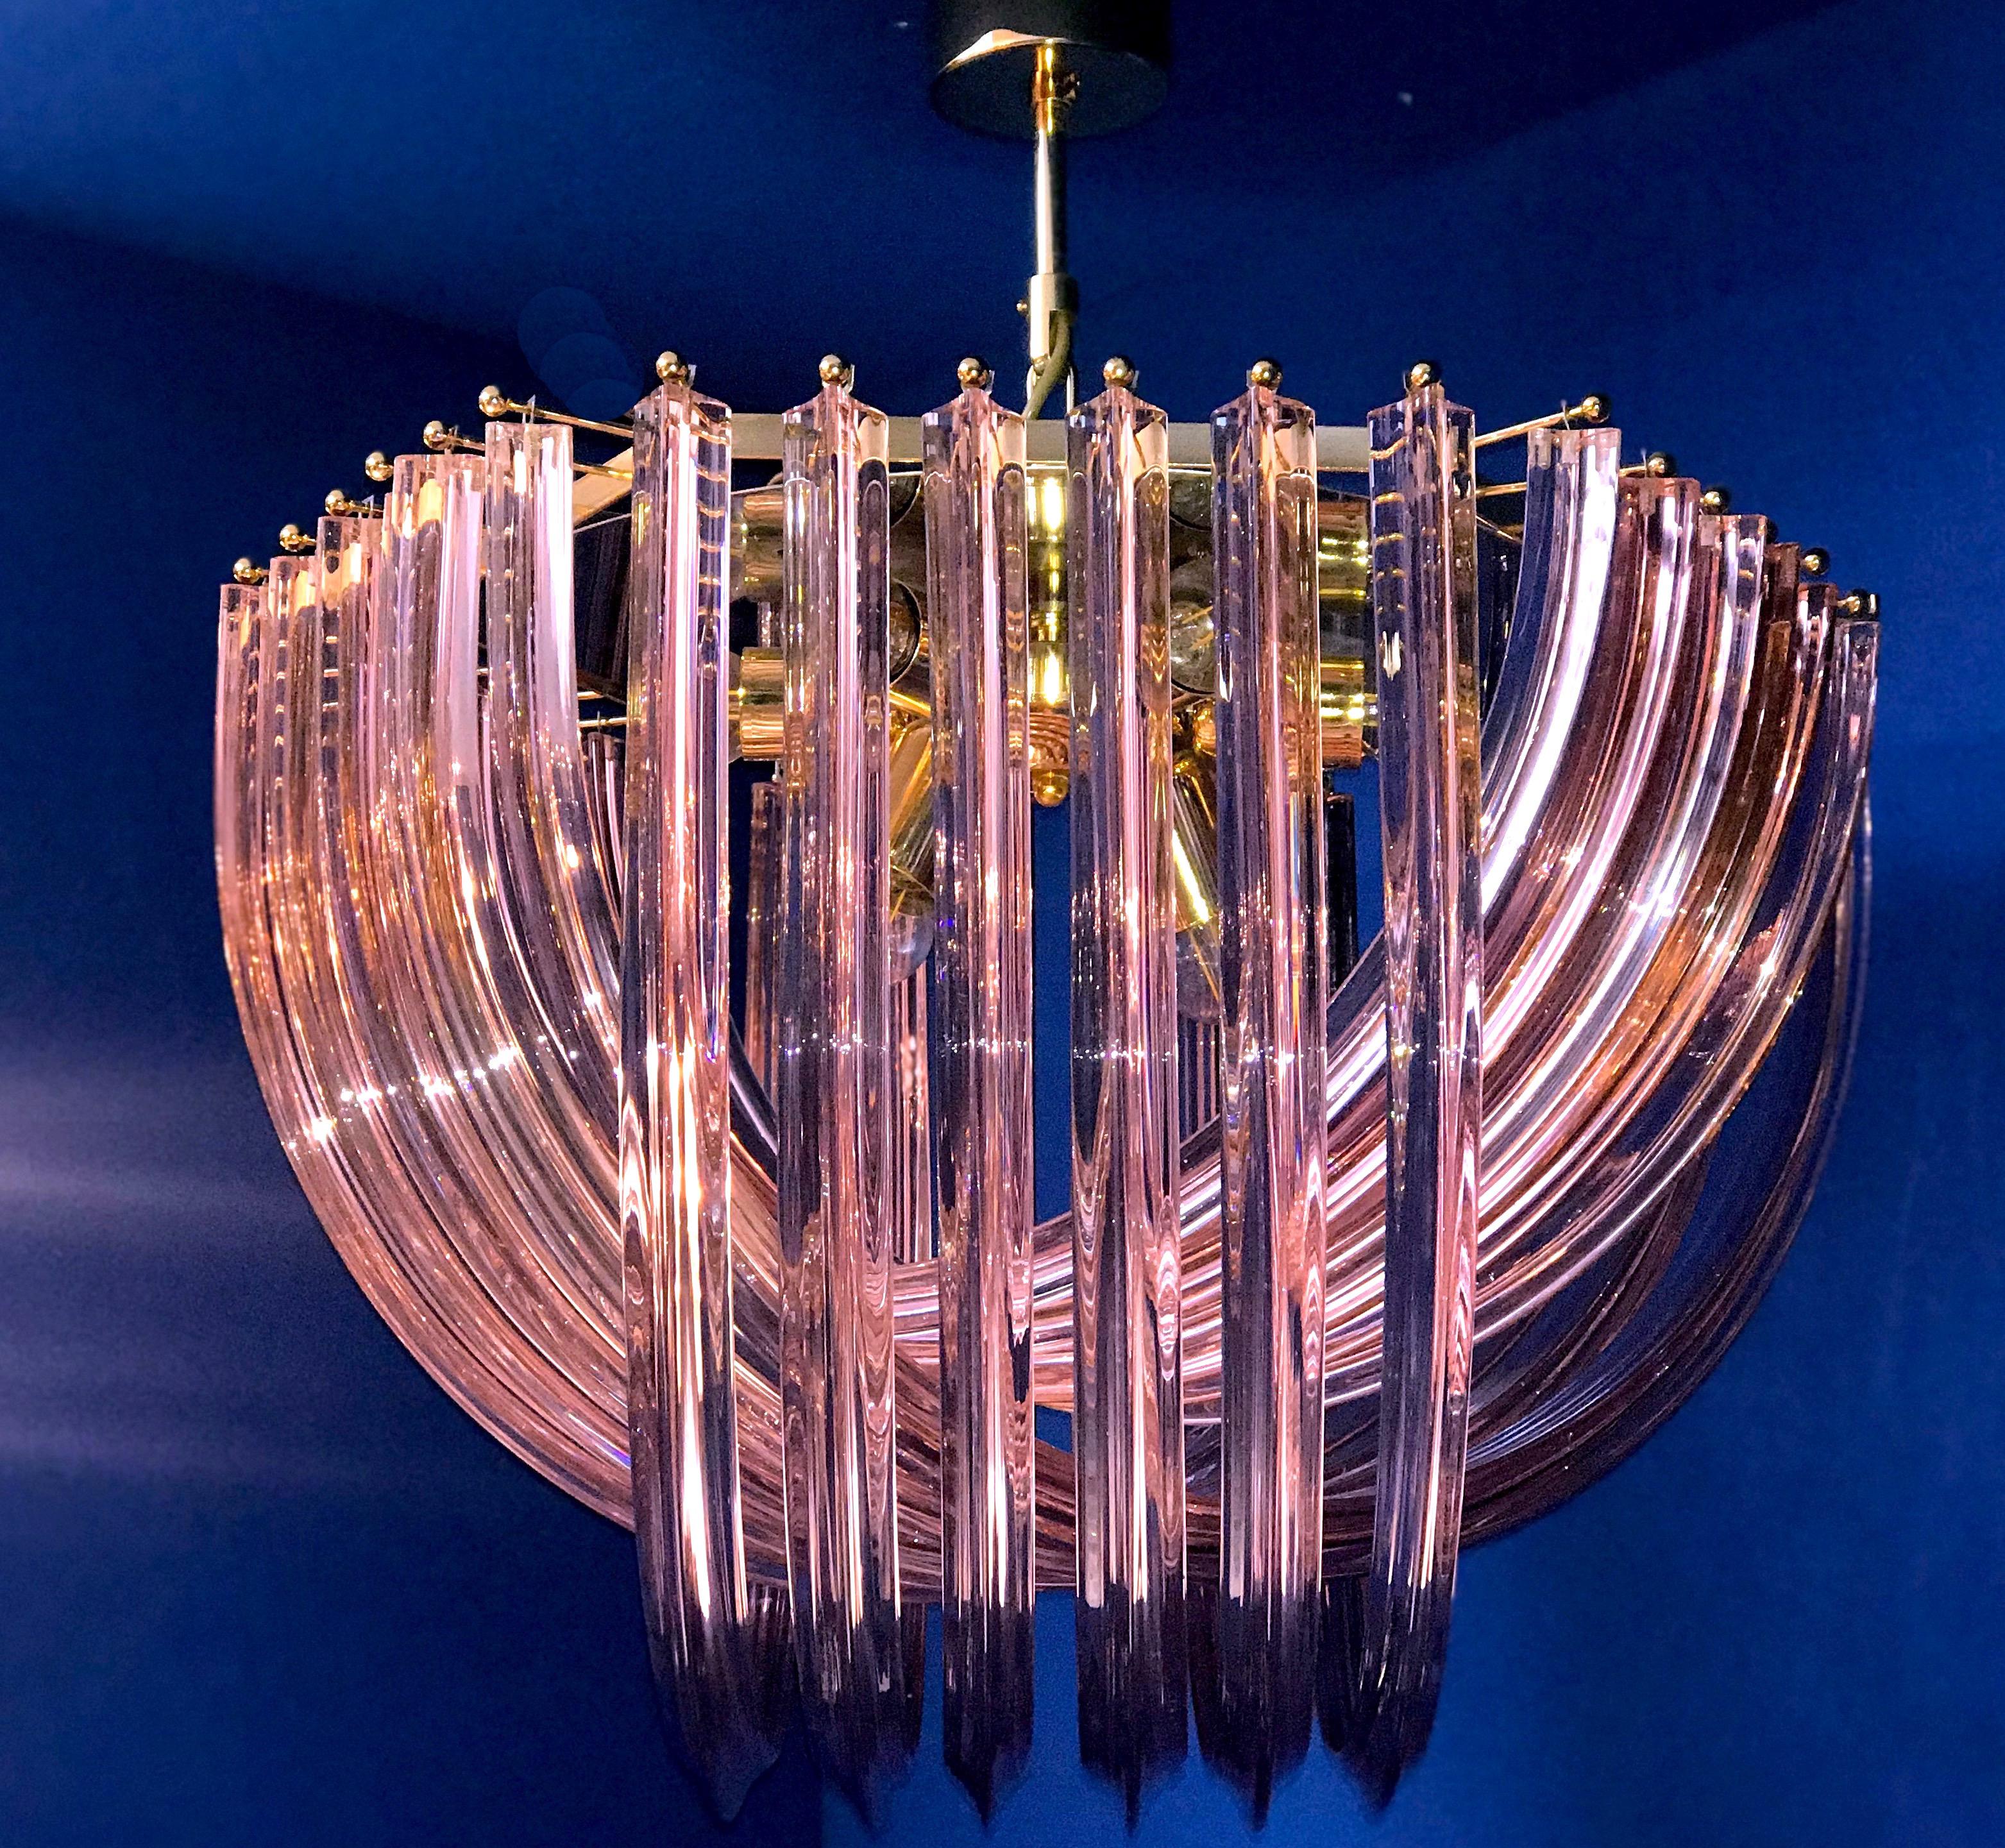 Amazing pink Murano glass chandelier or ceiling light with four layers of curving “triedri” glass prisms on an octagonal brass frame. A dynamic form, changing as you move around it, due to the overlapping levels of transparent glass with a fabulous